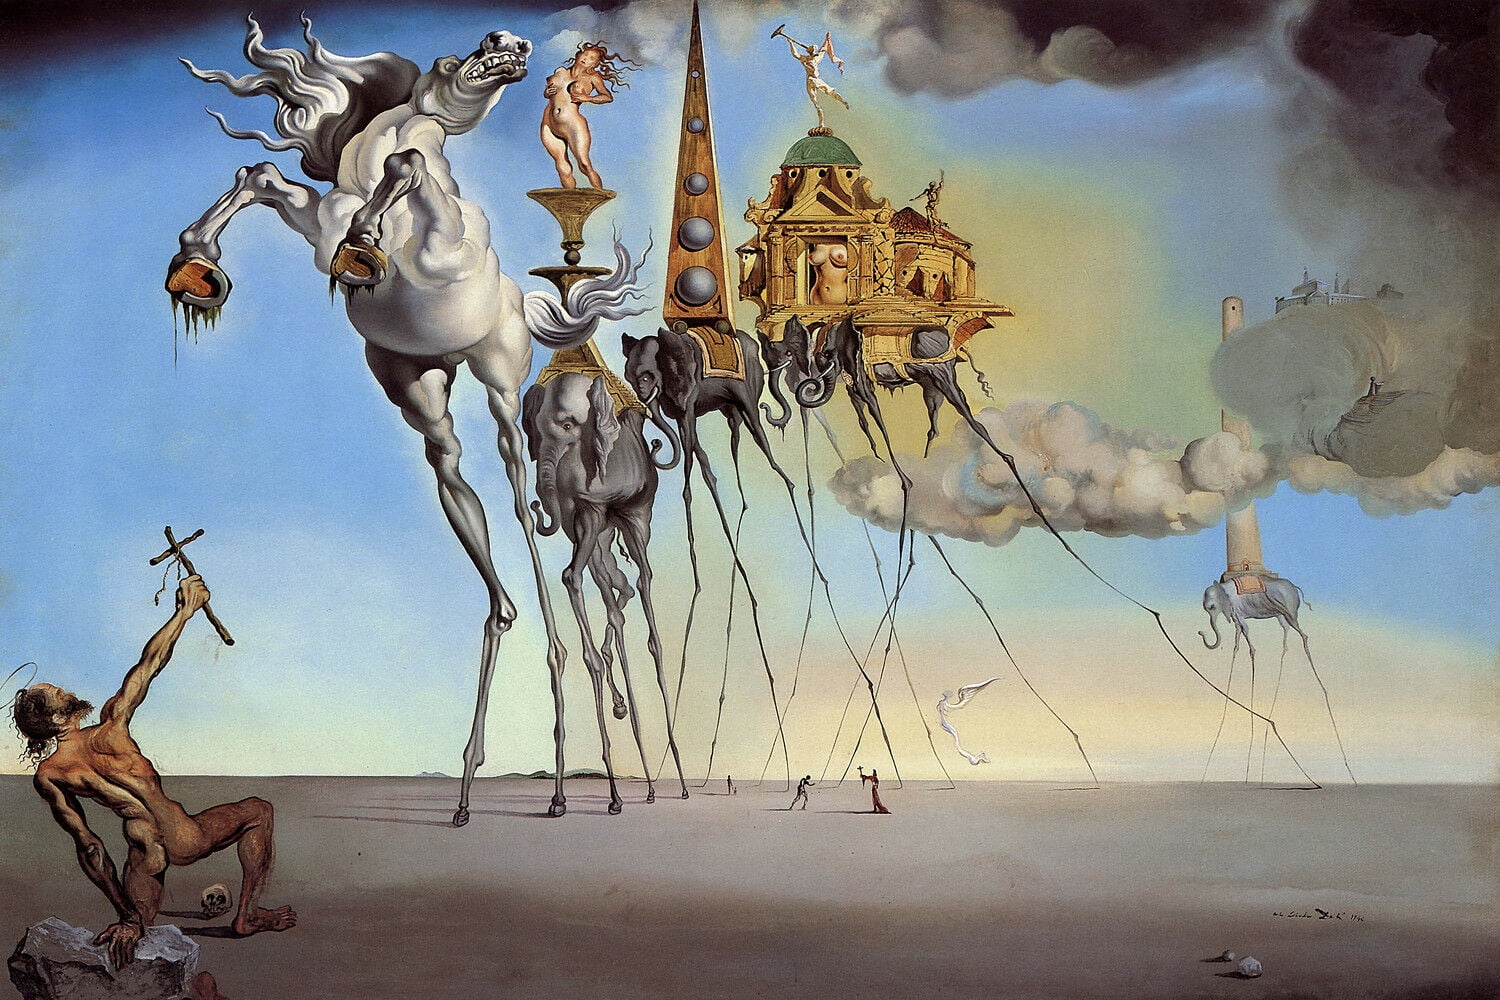 Art Print/Poster 11x14 inches The Temptation of St Anthony by Salvador Dali 